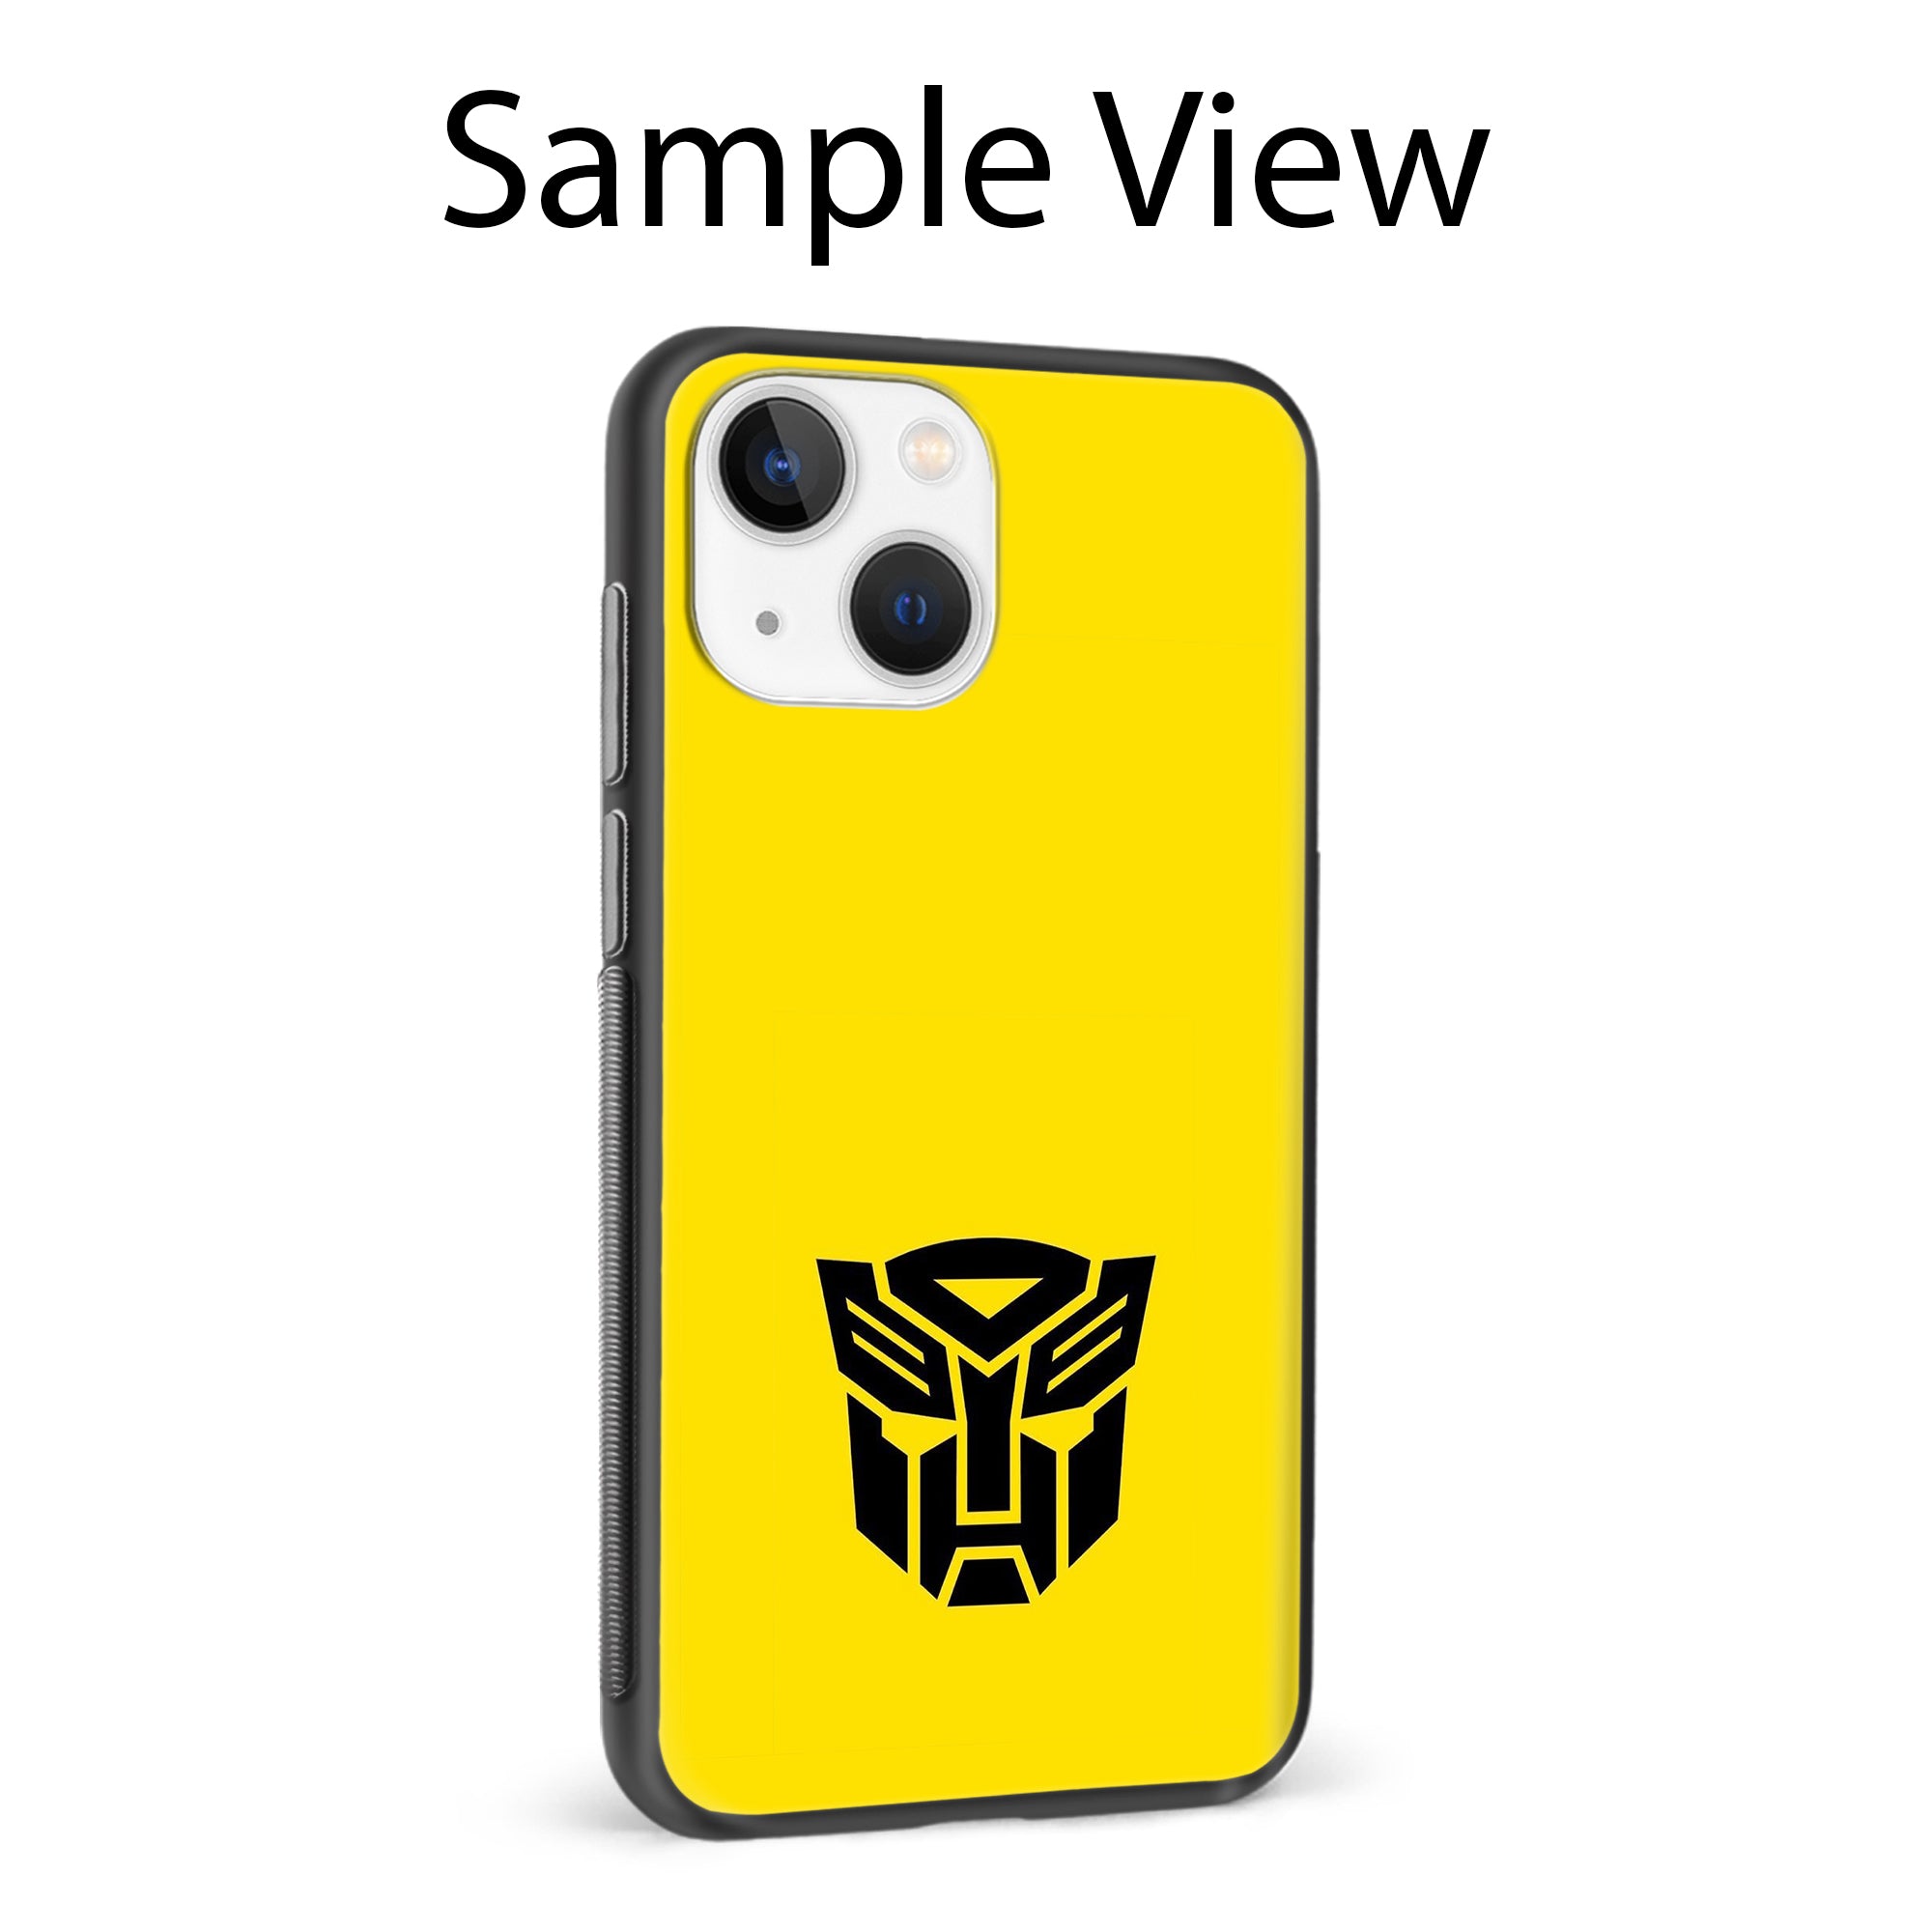 Buy Transformer Logo Metal-Silicon Back Mobile Phone Case/Cover For Samsung Galaxy A50 / A50s / A30s Online